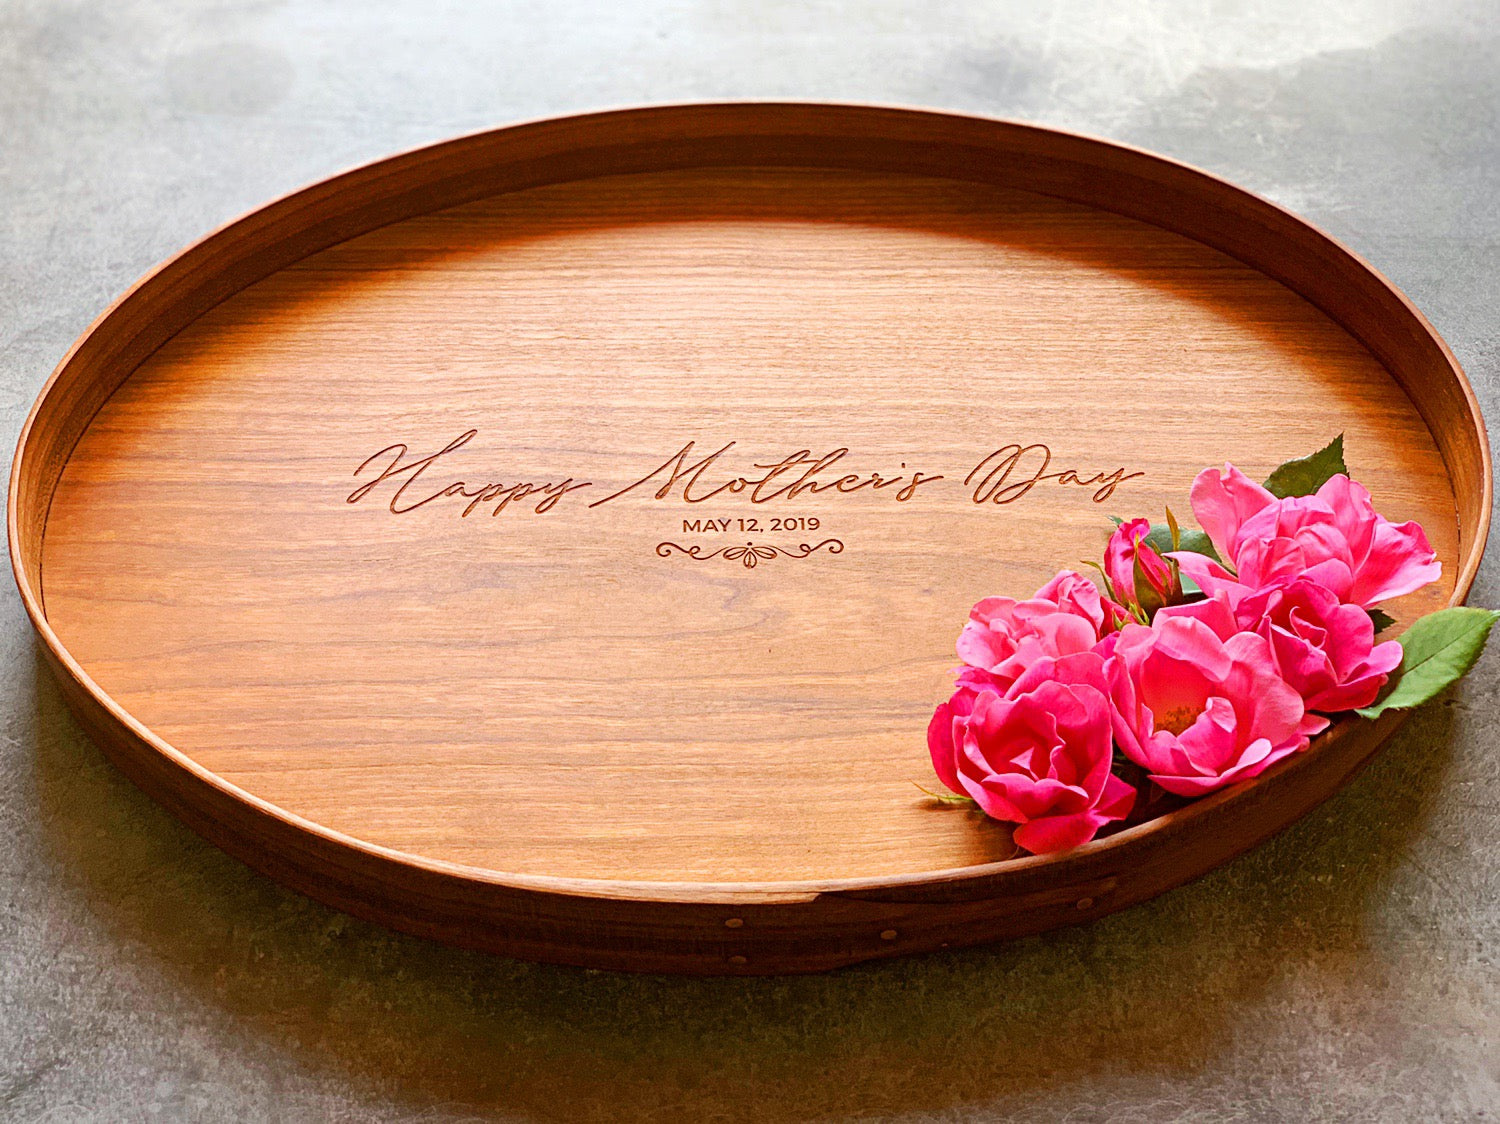 Decorative tray, personalized with Happy Mothers Day